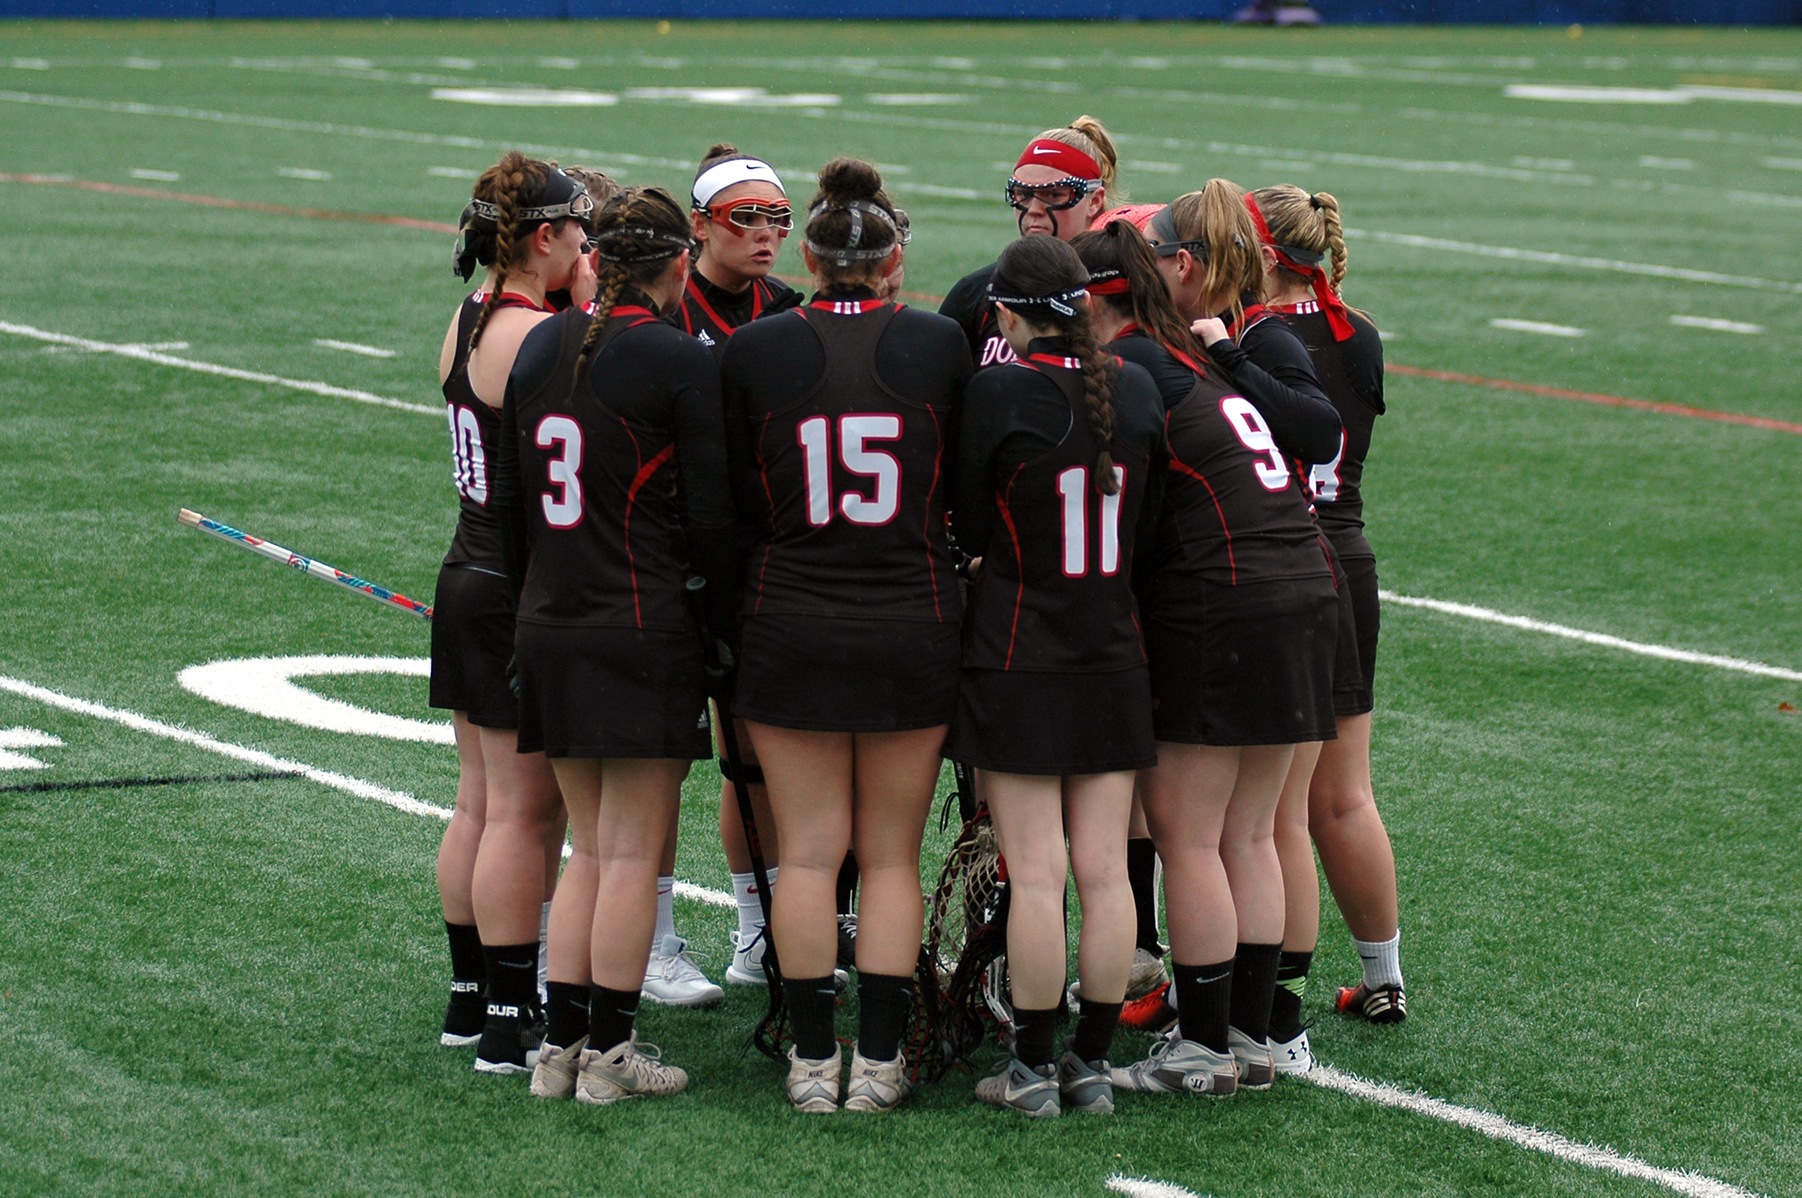 WOMEN'S LACROSSE OPEN SEASON WITH A LOSS TO SOUTHERN NEW HAMPSHIRE UNIVERSITY